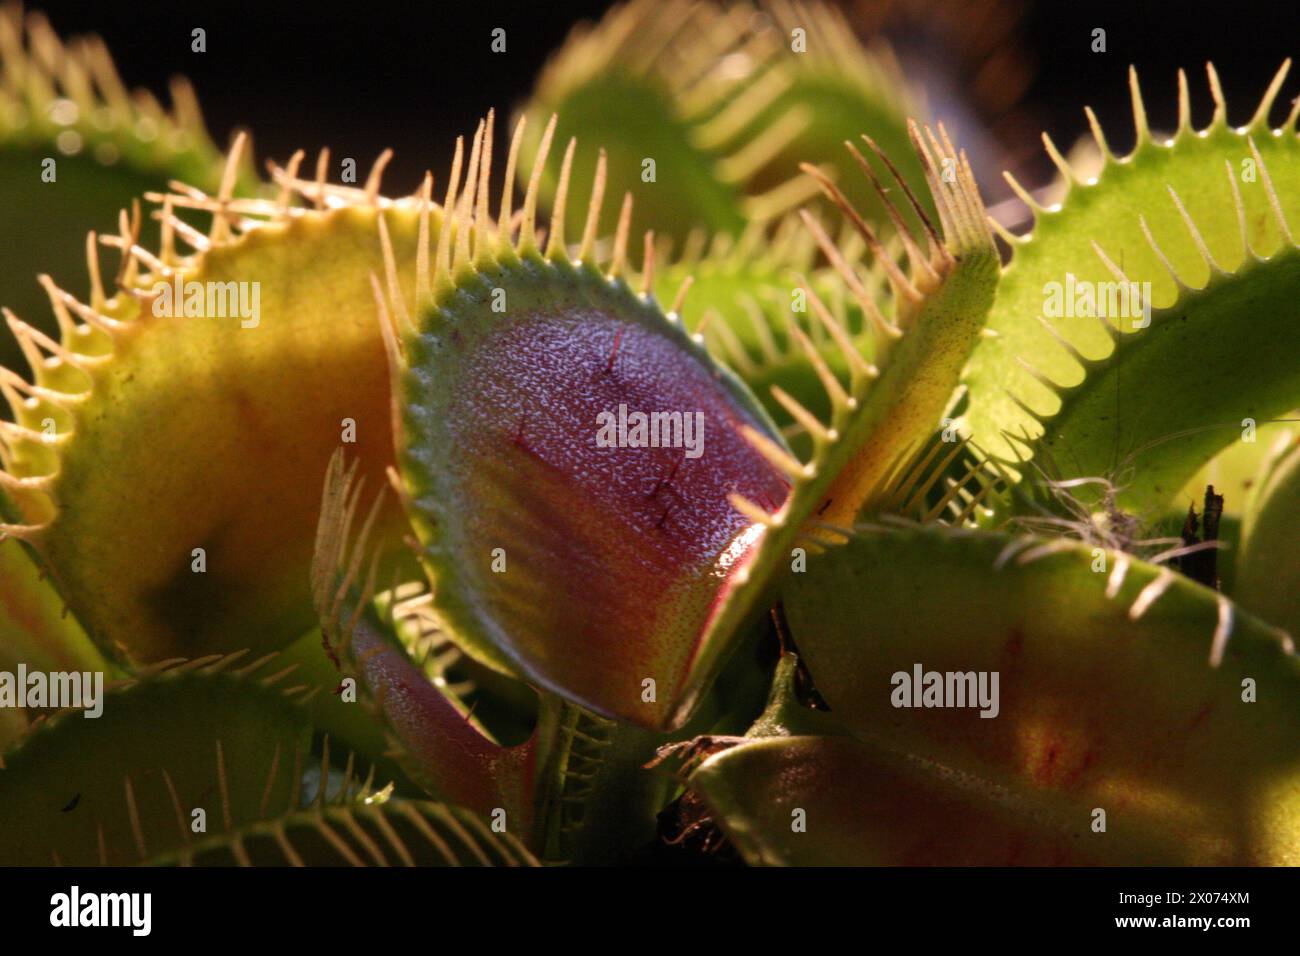 Macro photo of a carnivorous plant, for illustration, books, posters Stock Photo